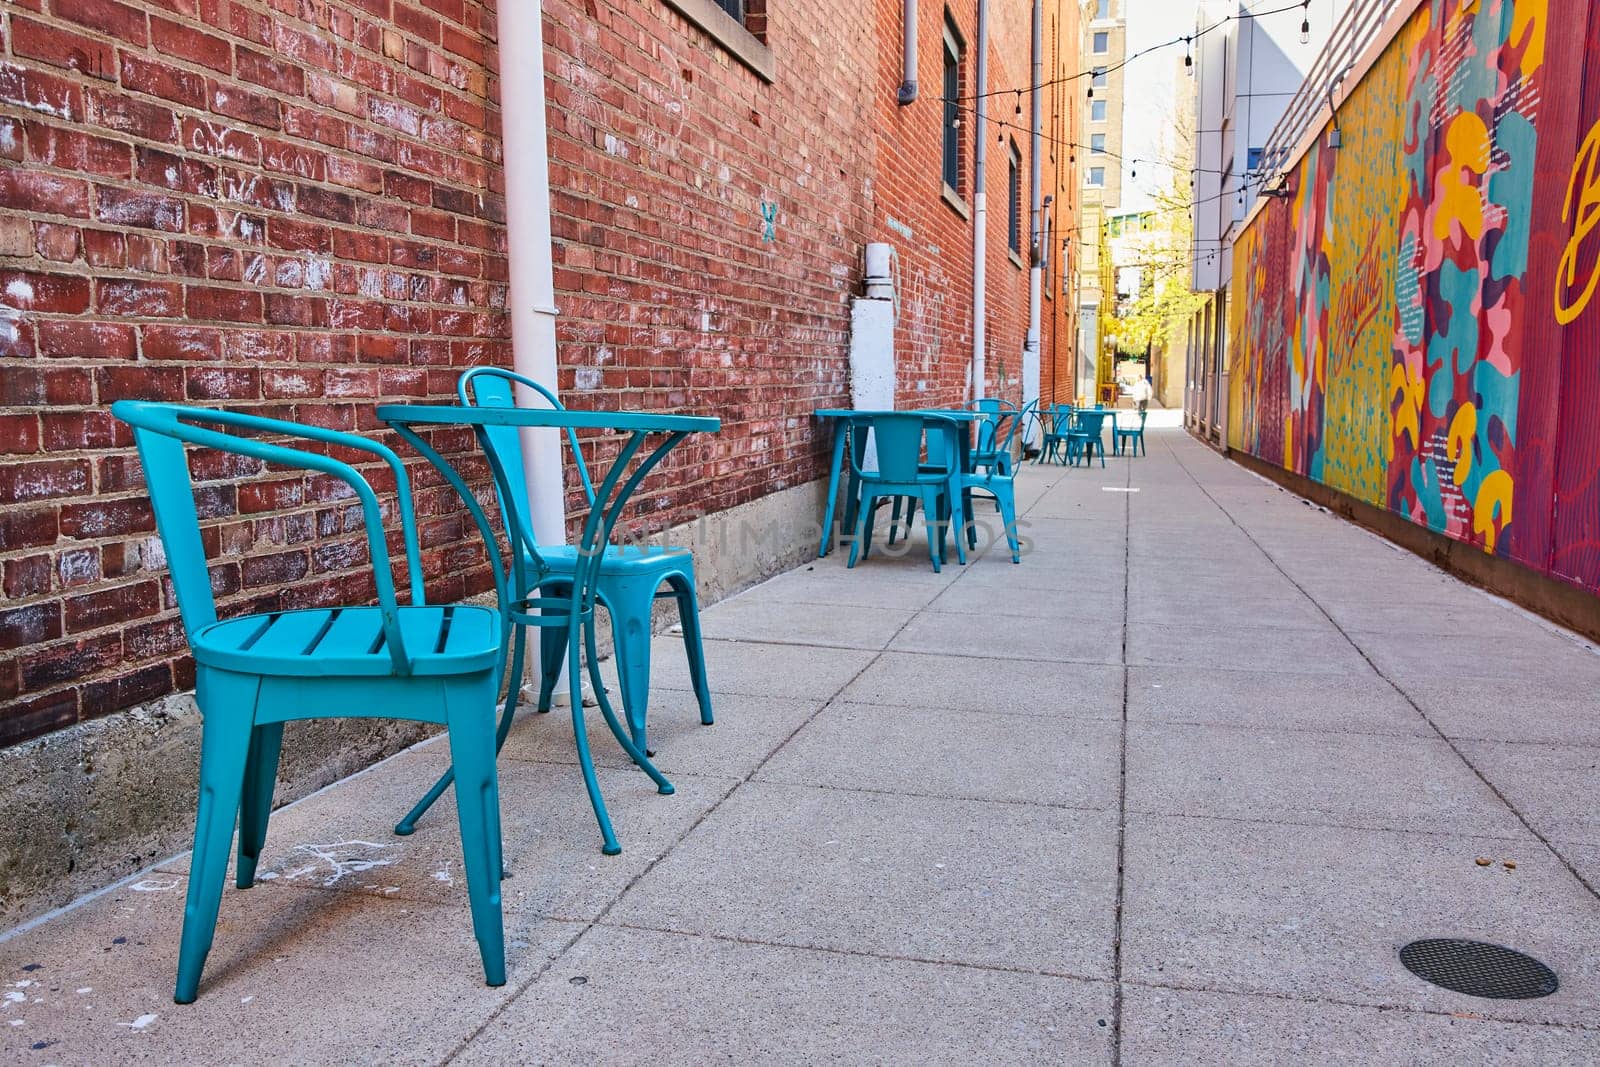 Vibrant urban cafe chairs line an alley in Fort Wayne, set against a colorful mural and historic red bricks.